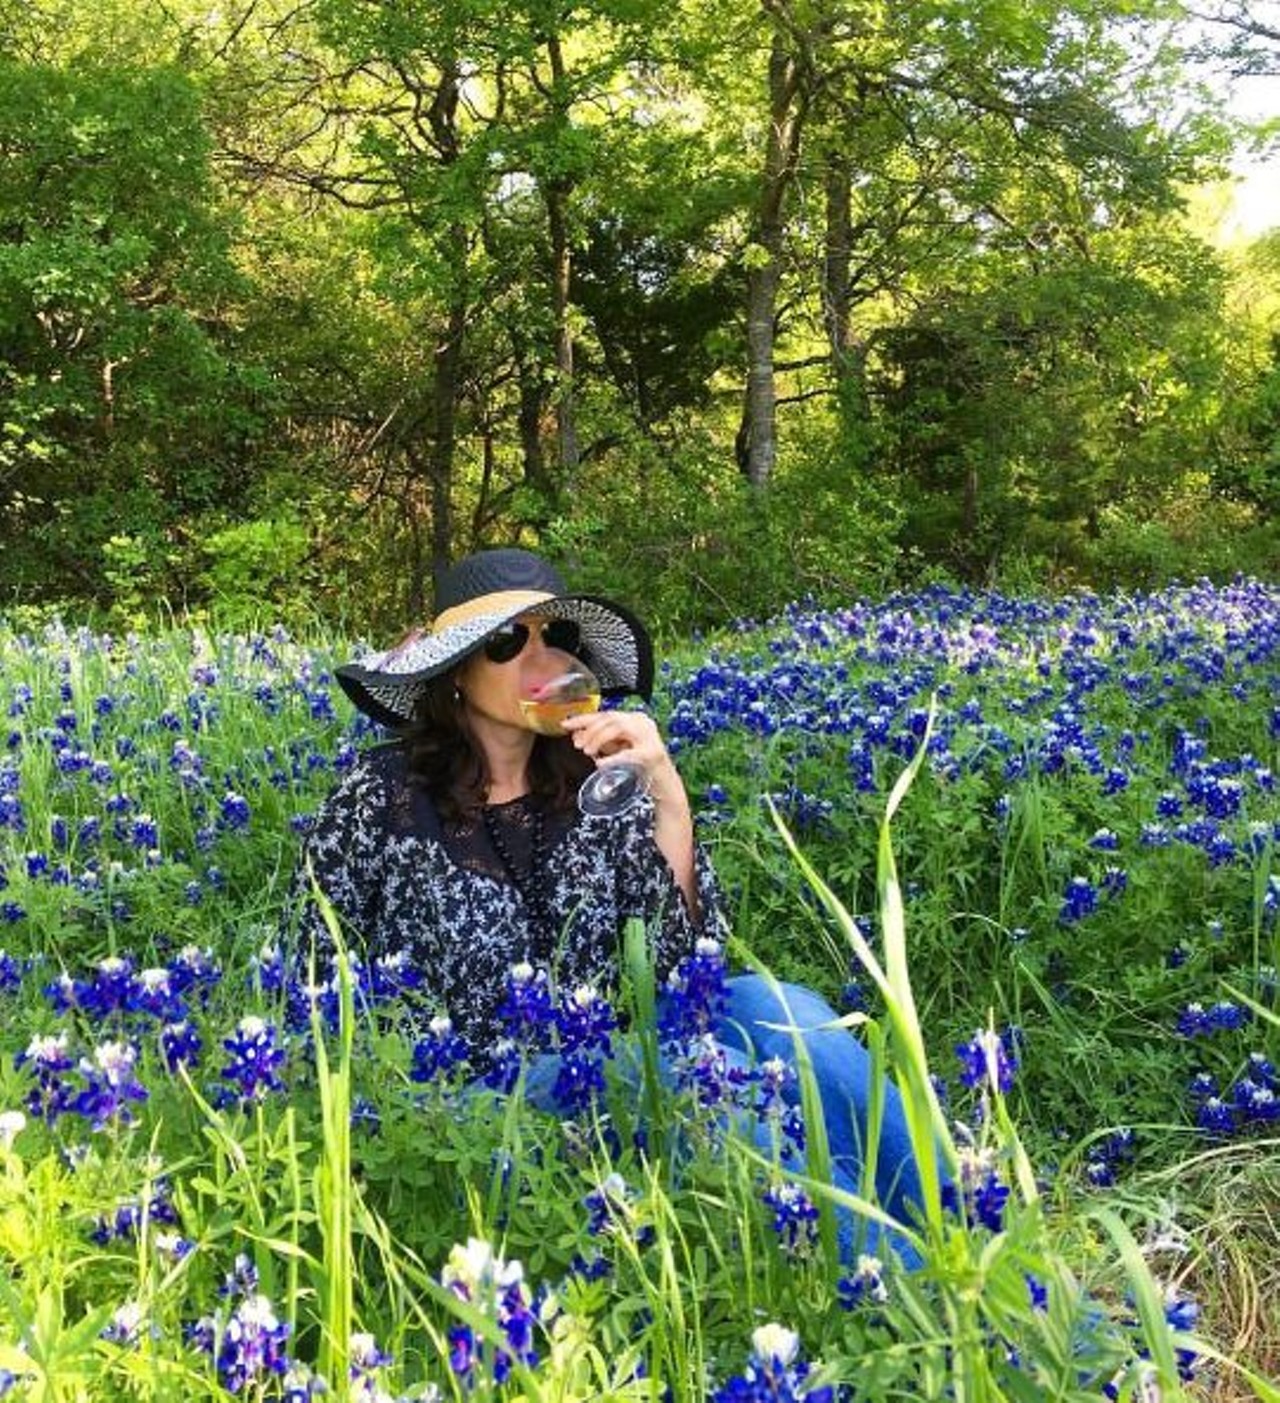 Take a picture with bluebonnets
Multiple locations, facebook.com/texasbluebonnetsightings
Are you truly a Texan unless you have at least one picture with the state flower?
Photo via Instagram, malkomes1